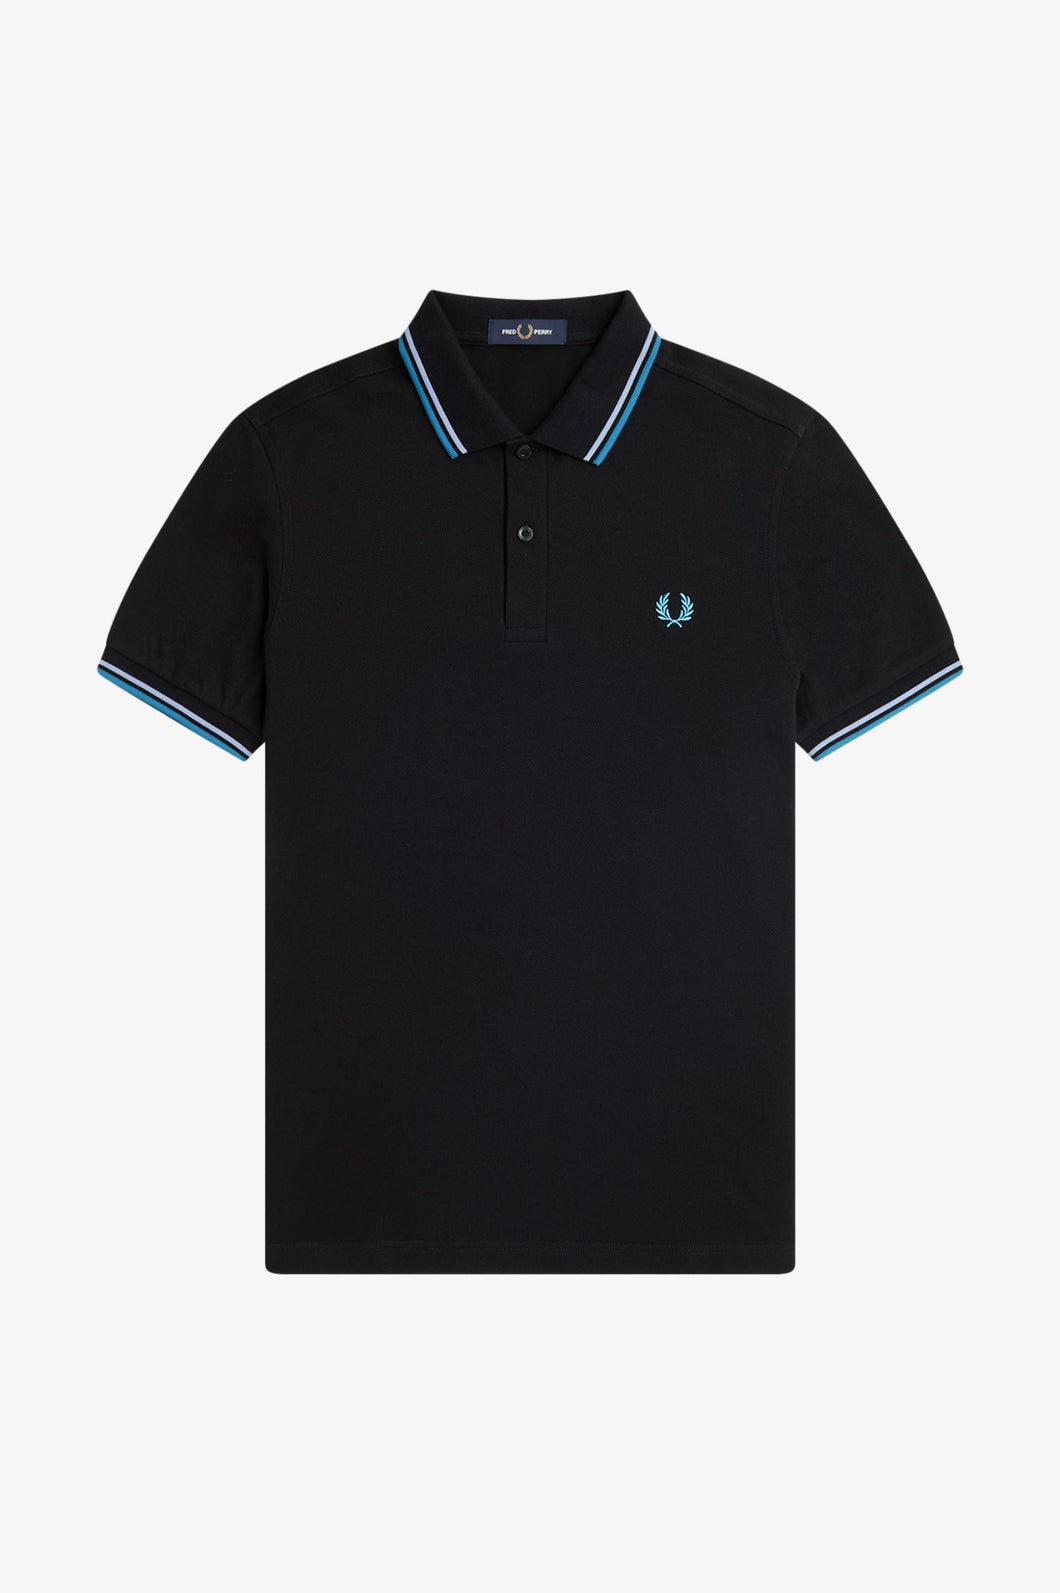 Fred Perry Black Polo With Light Smoke and Ocean Blue Twin Tipping